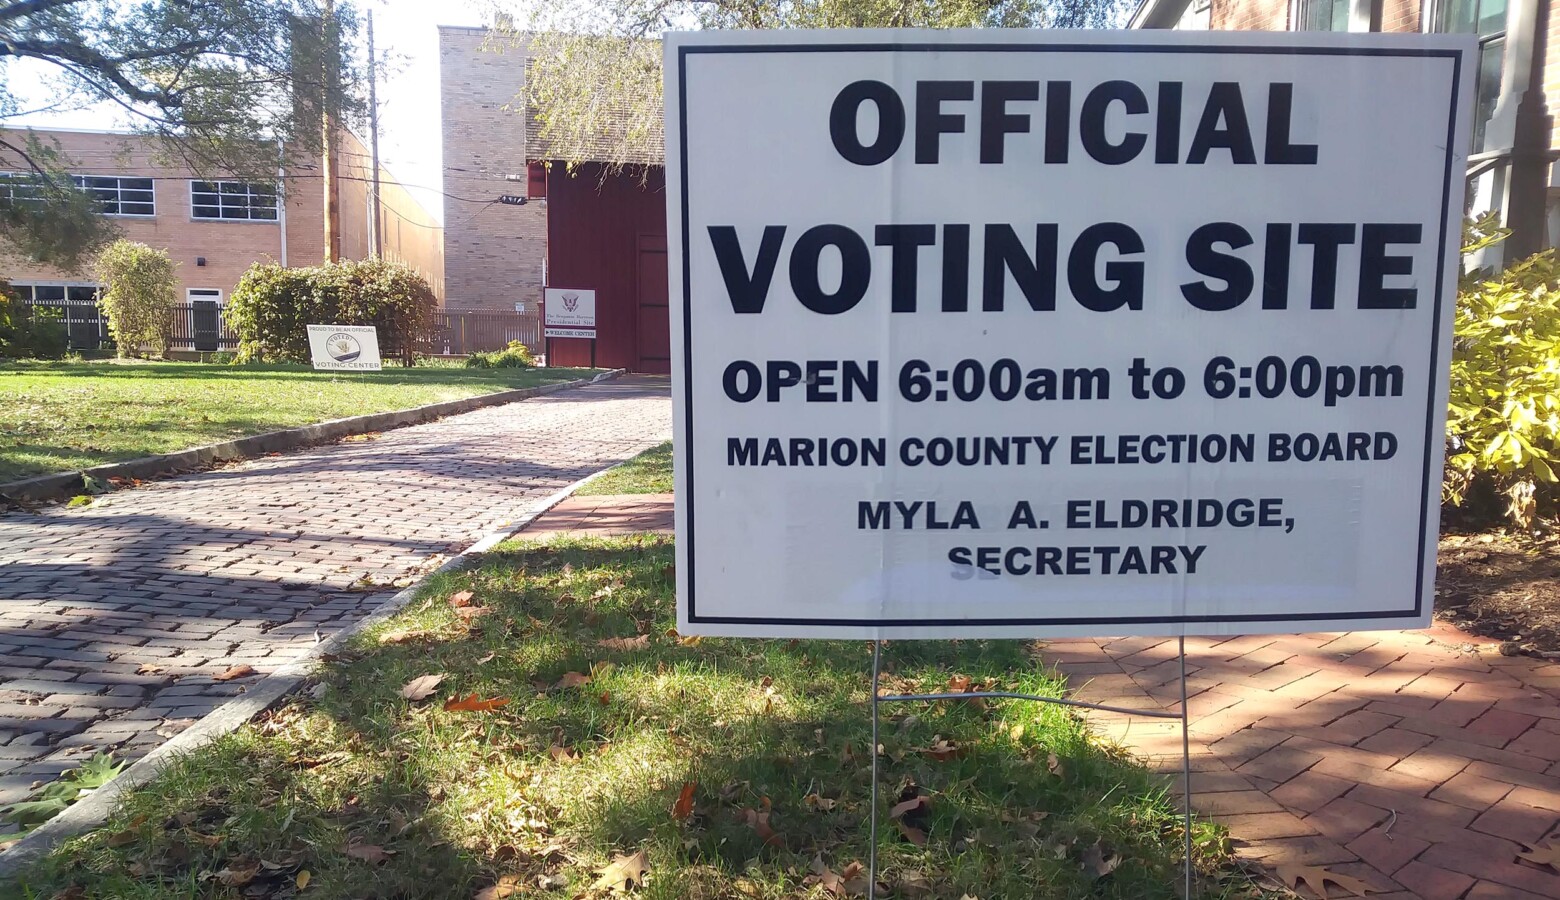 A 2019 Indiana law, now halted, said only county election boards - by unanimous vote - could ask a court to extend polling hours on Election Day. (Lauren Chapman/IPB News)